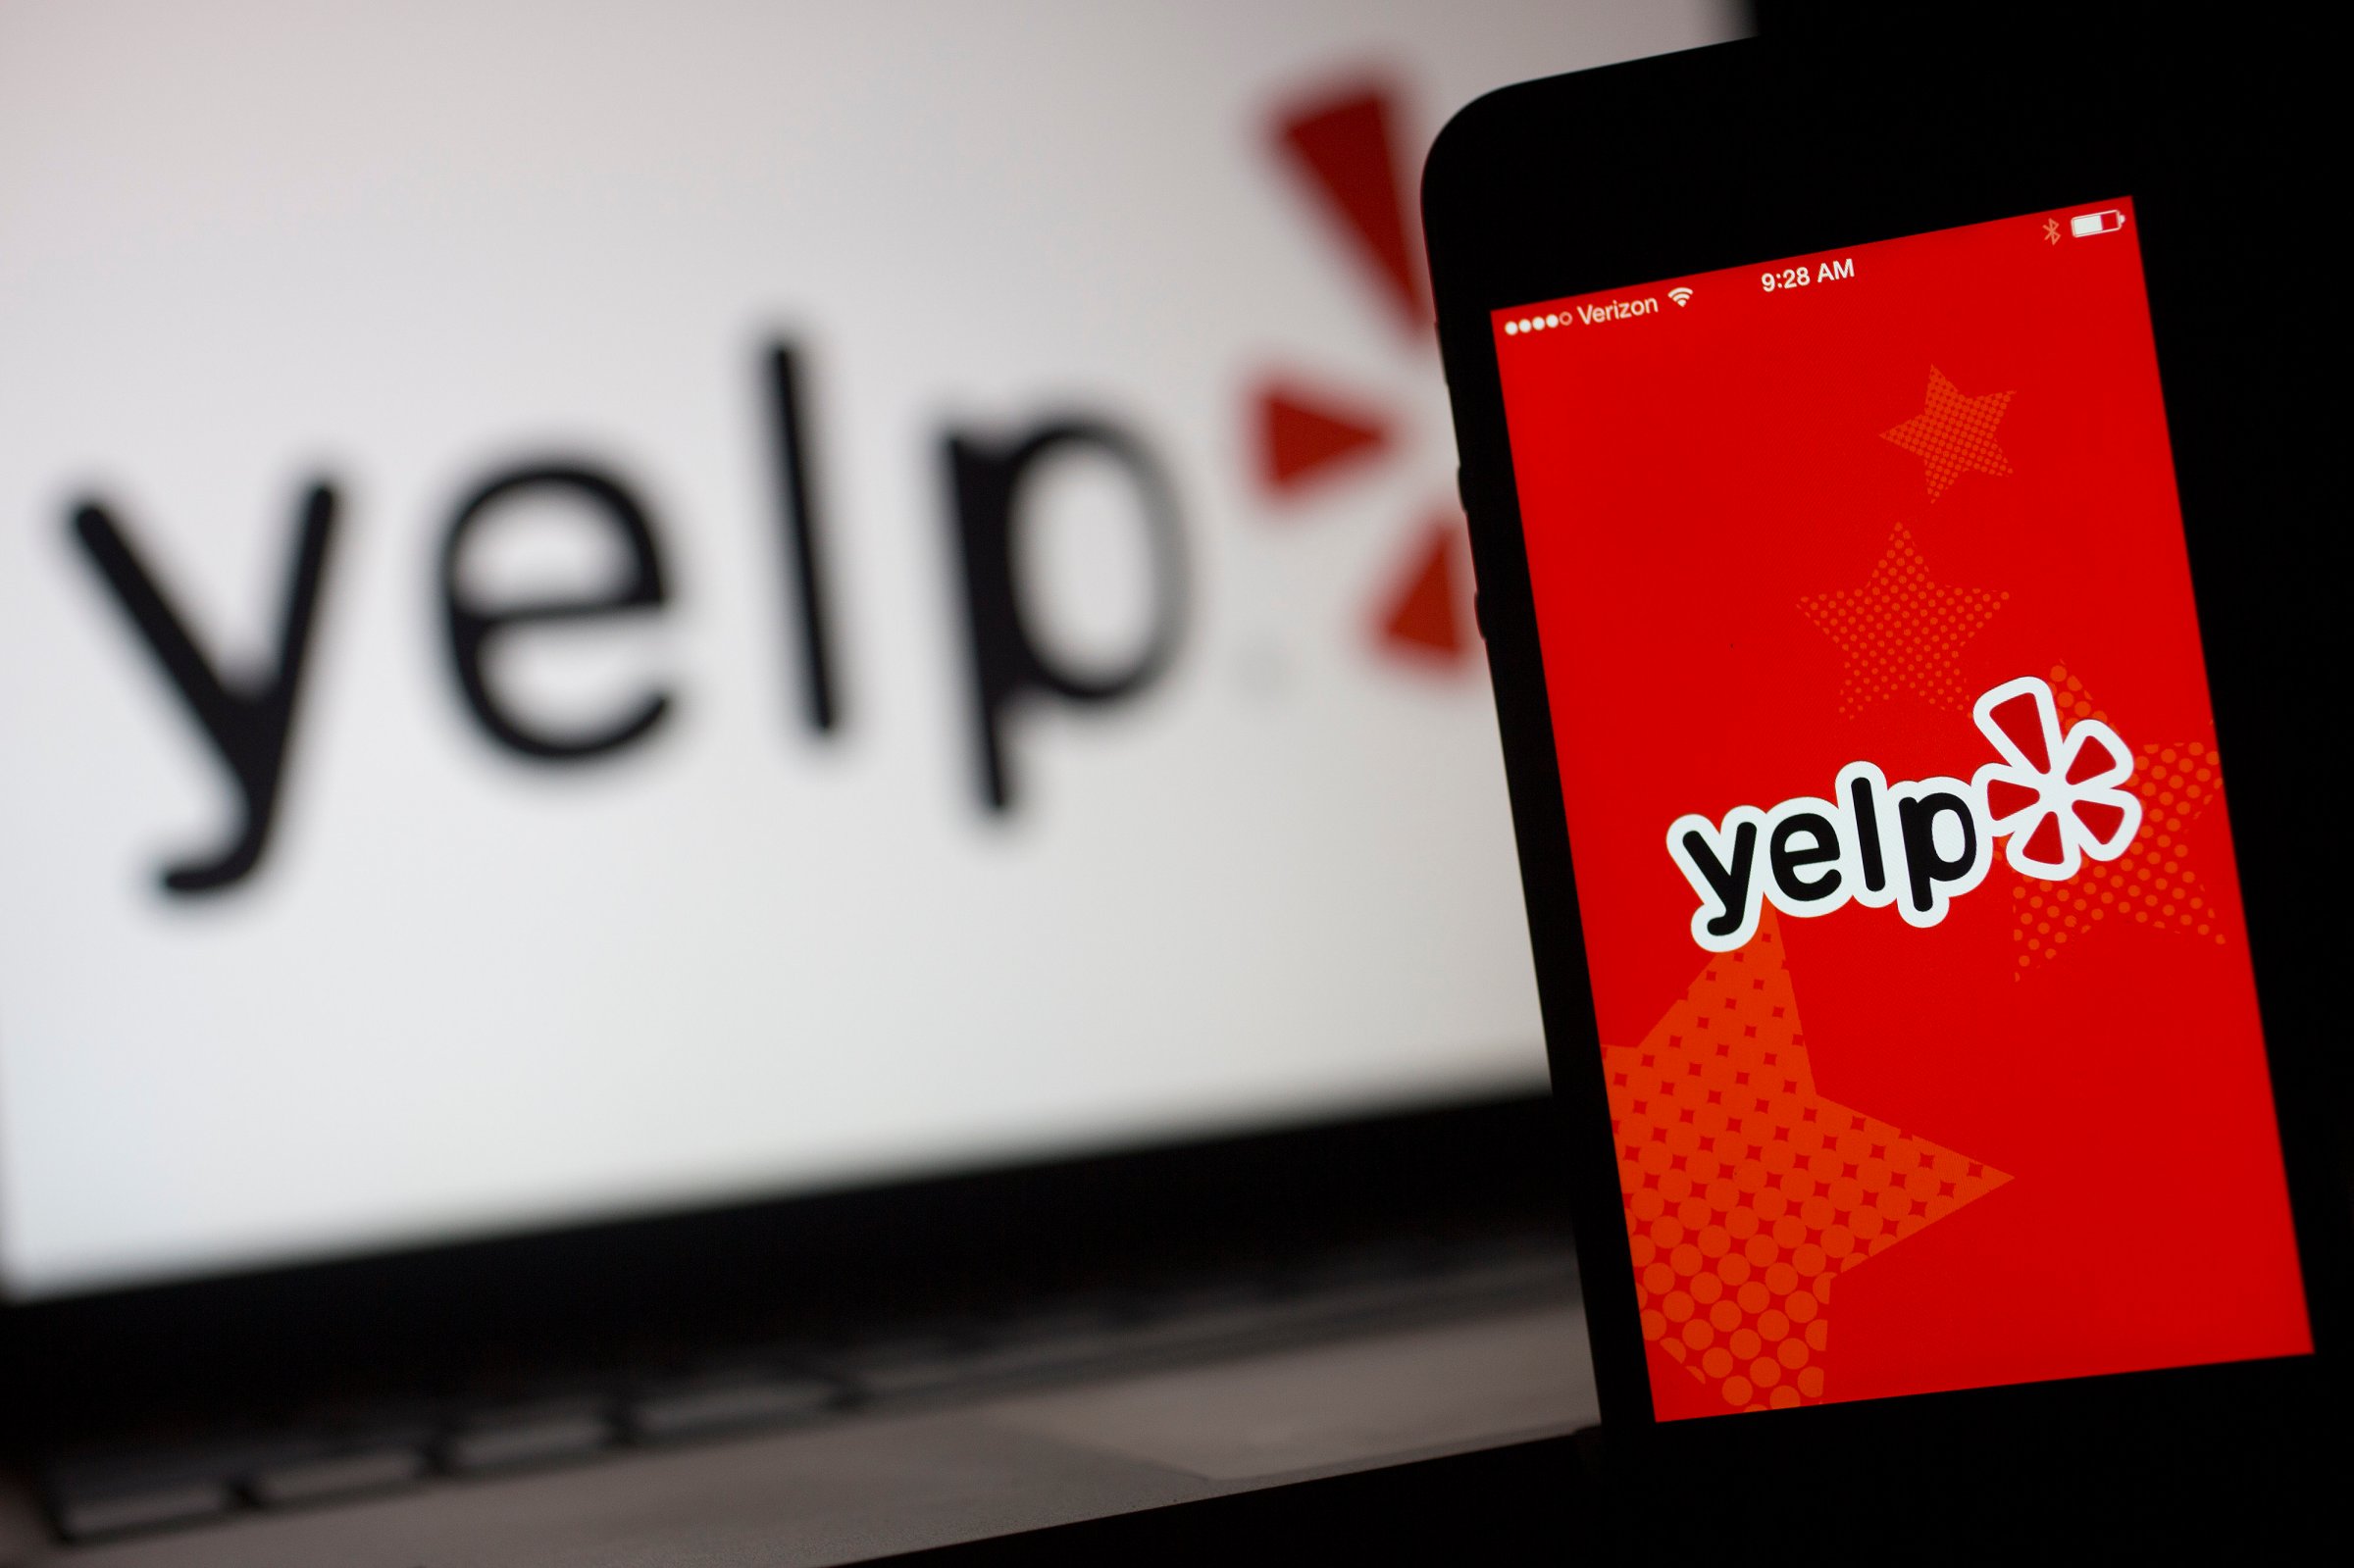 The Yelp Inc. application and logo are displayed on an Apple Inc. iPhone 5s and iPad Air in this arranged photograph in Washington, D.C., U.S., on Friday, April 25, 2014.